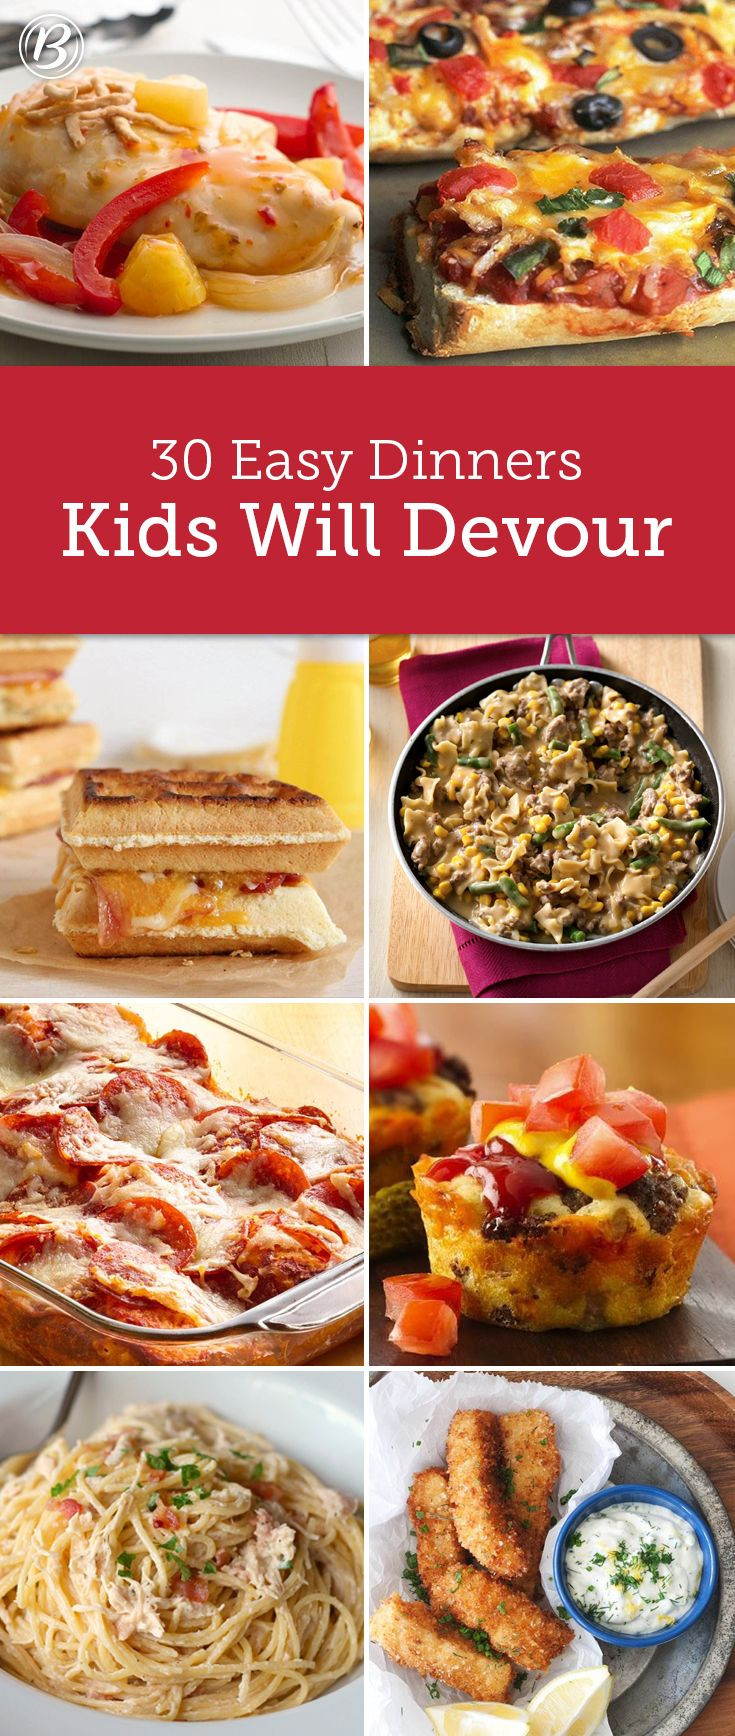 Fast Kid Friendly Dinners
 Kids’ Most Requested Dinners